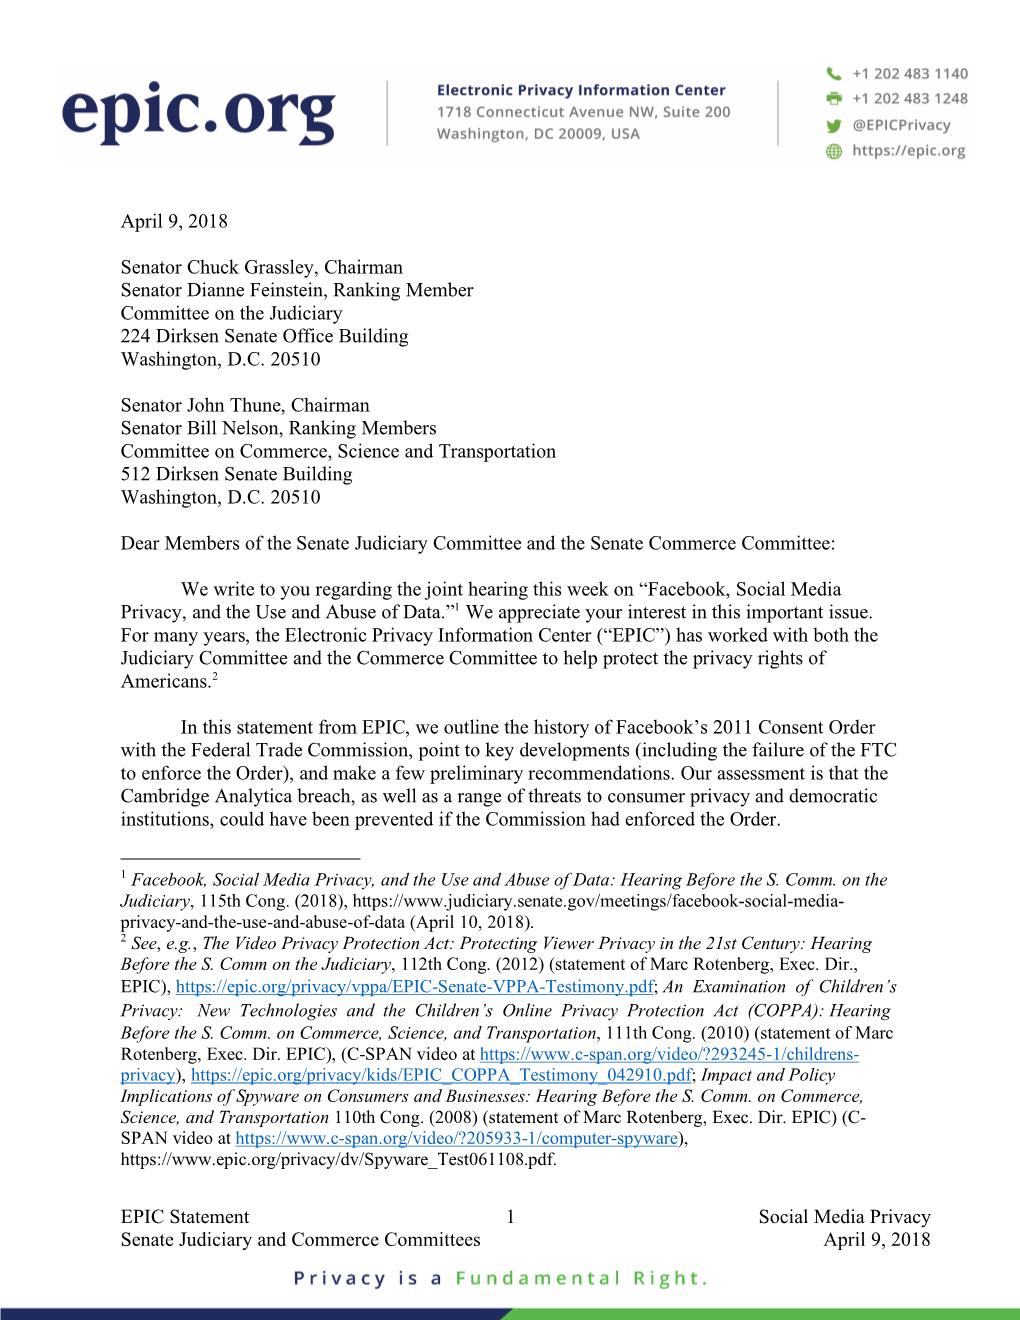 EPIC Statement 1 Social Media Privacy Senate Judiciary and Commerce Committees April 9, 2018